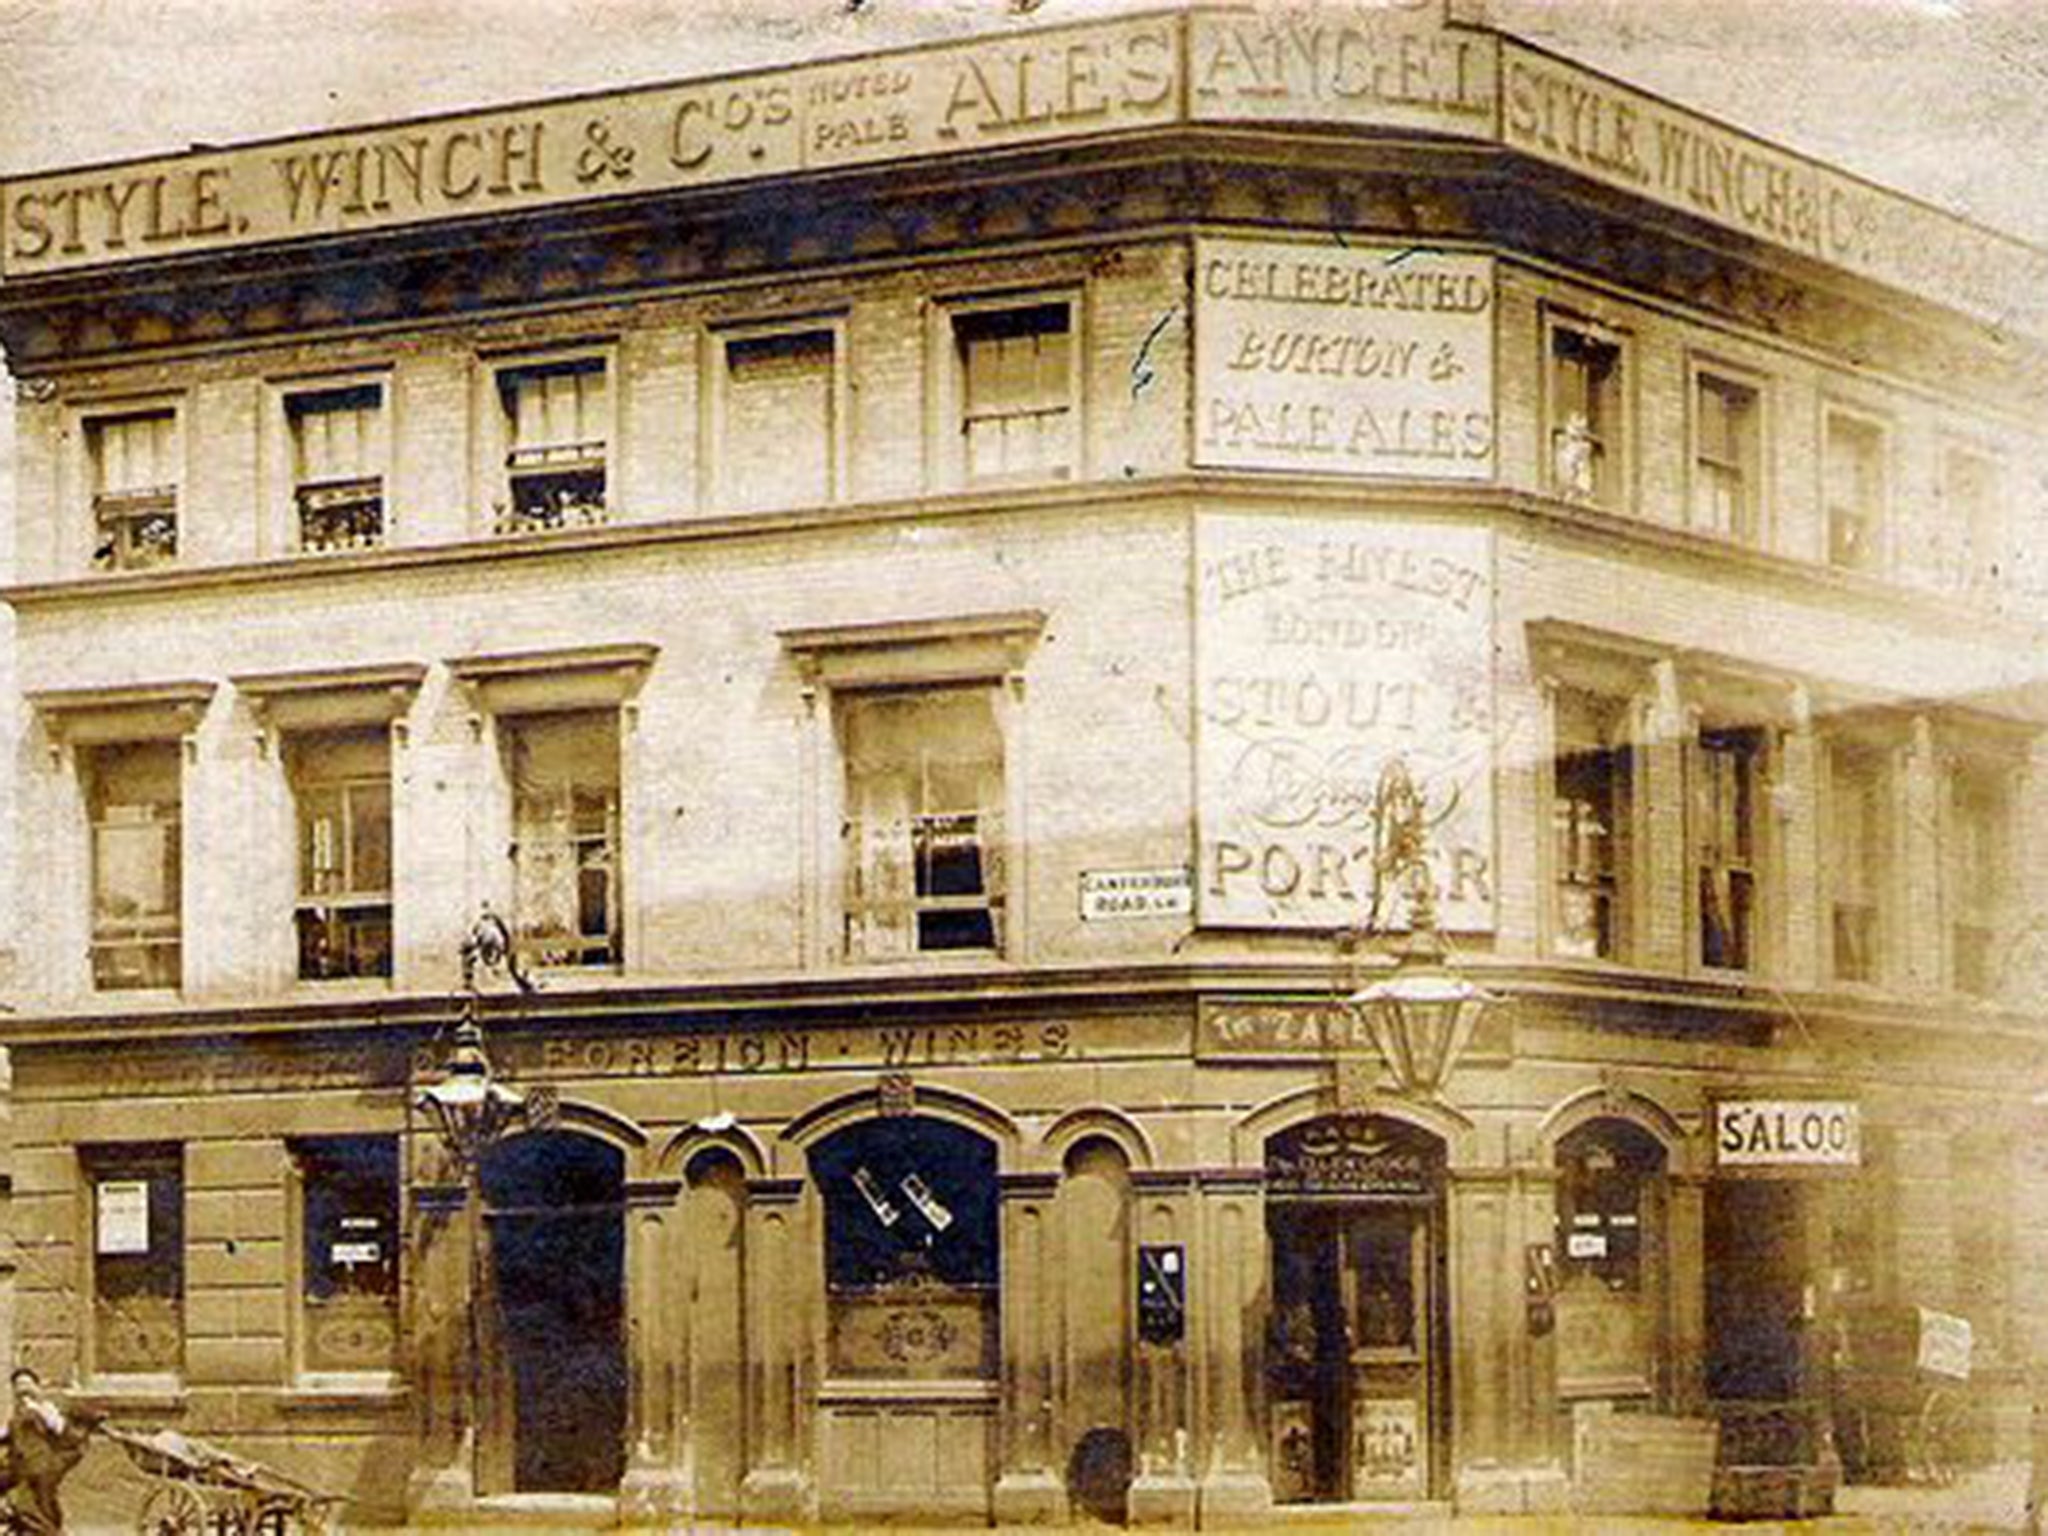 The Angel pub symbolises the transformation of Brixton. It started life as a grand saloon bar and hotel, and today has been replaced by expensive apartments